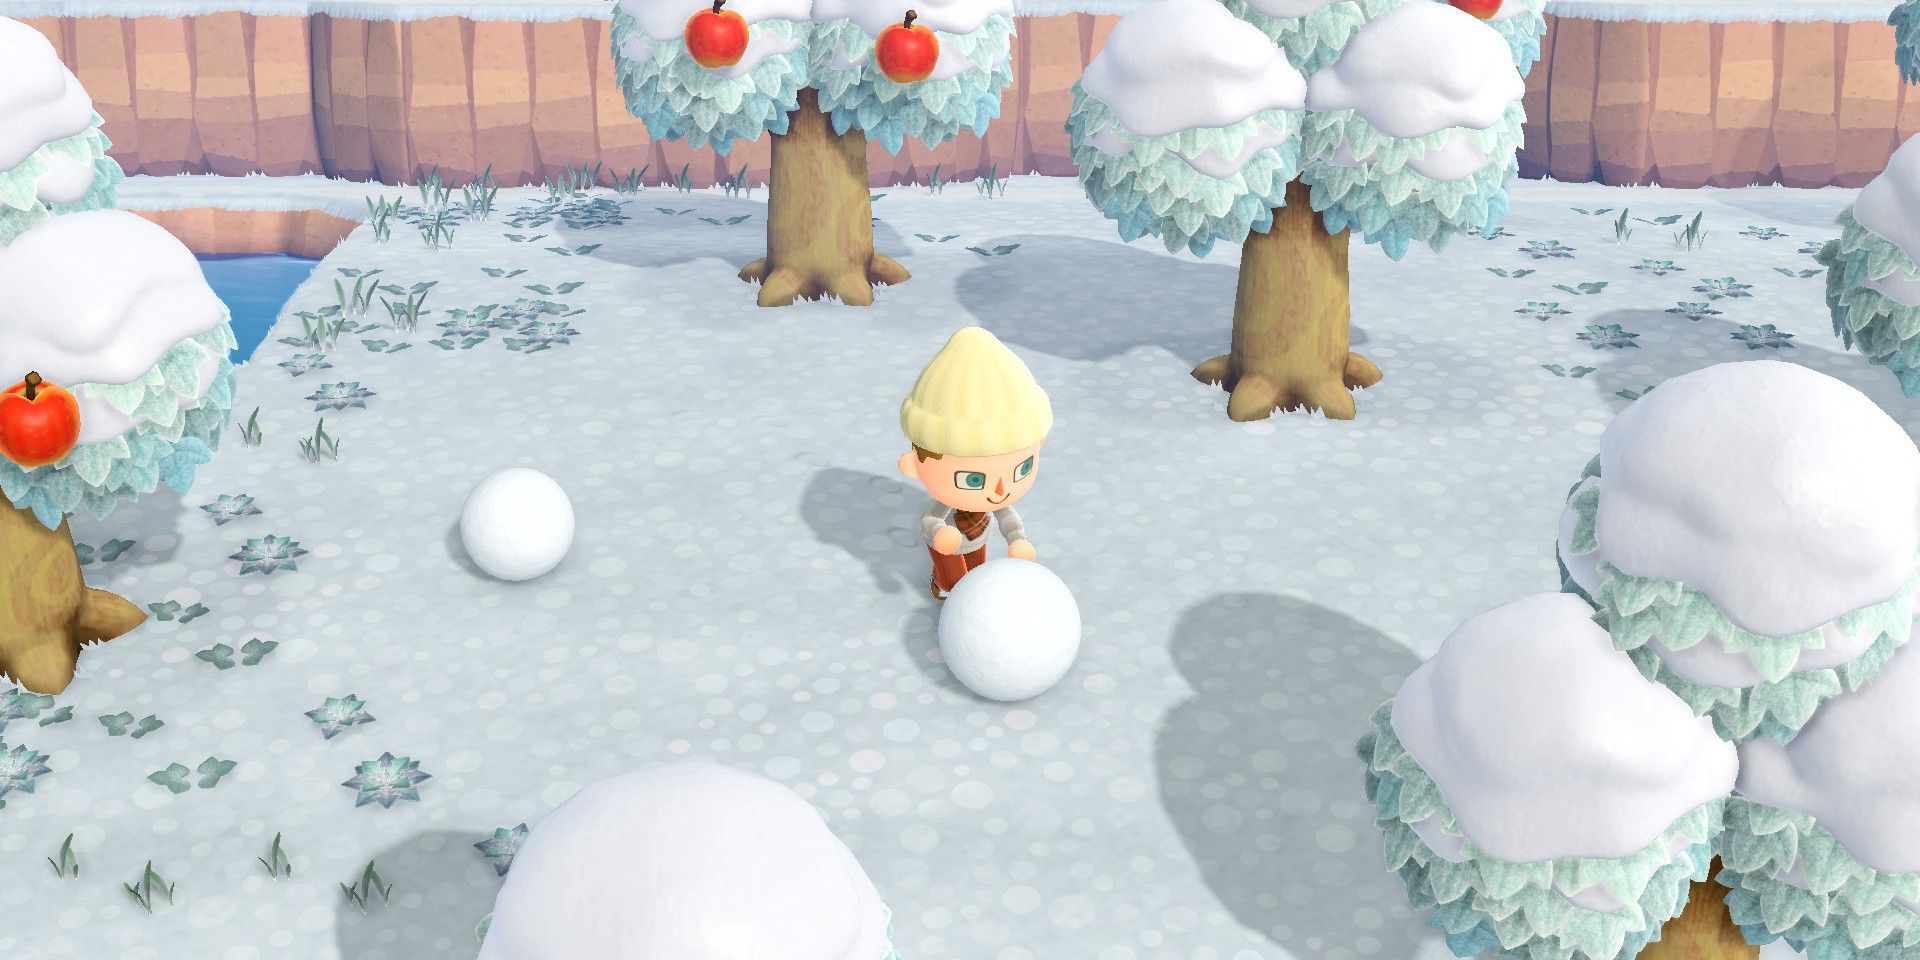 animal crossing new horizons villagers rolling snowball for snowboy in winter snow